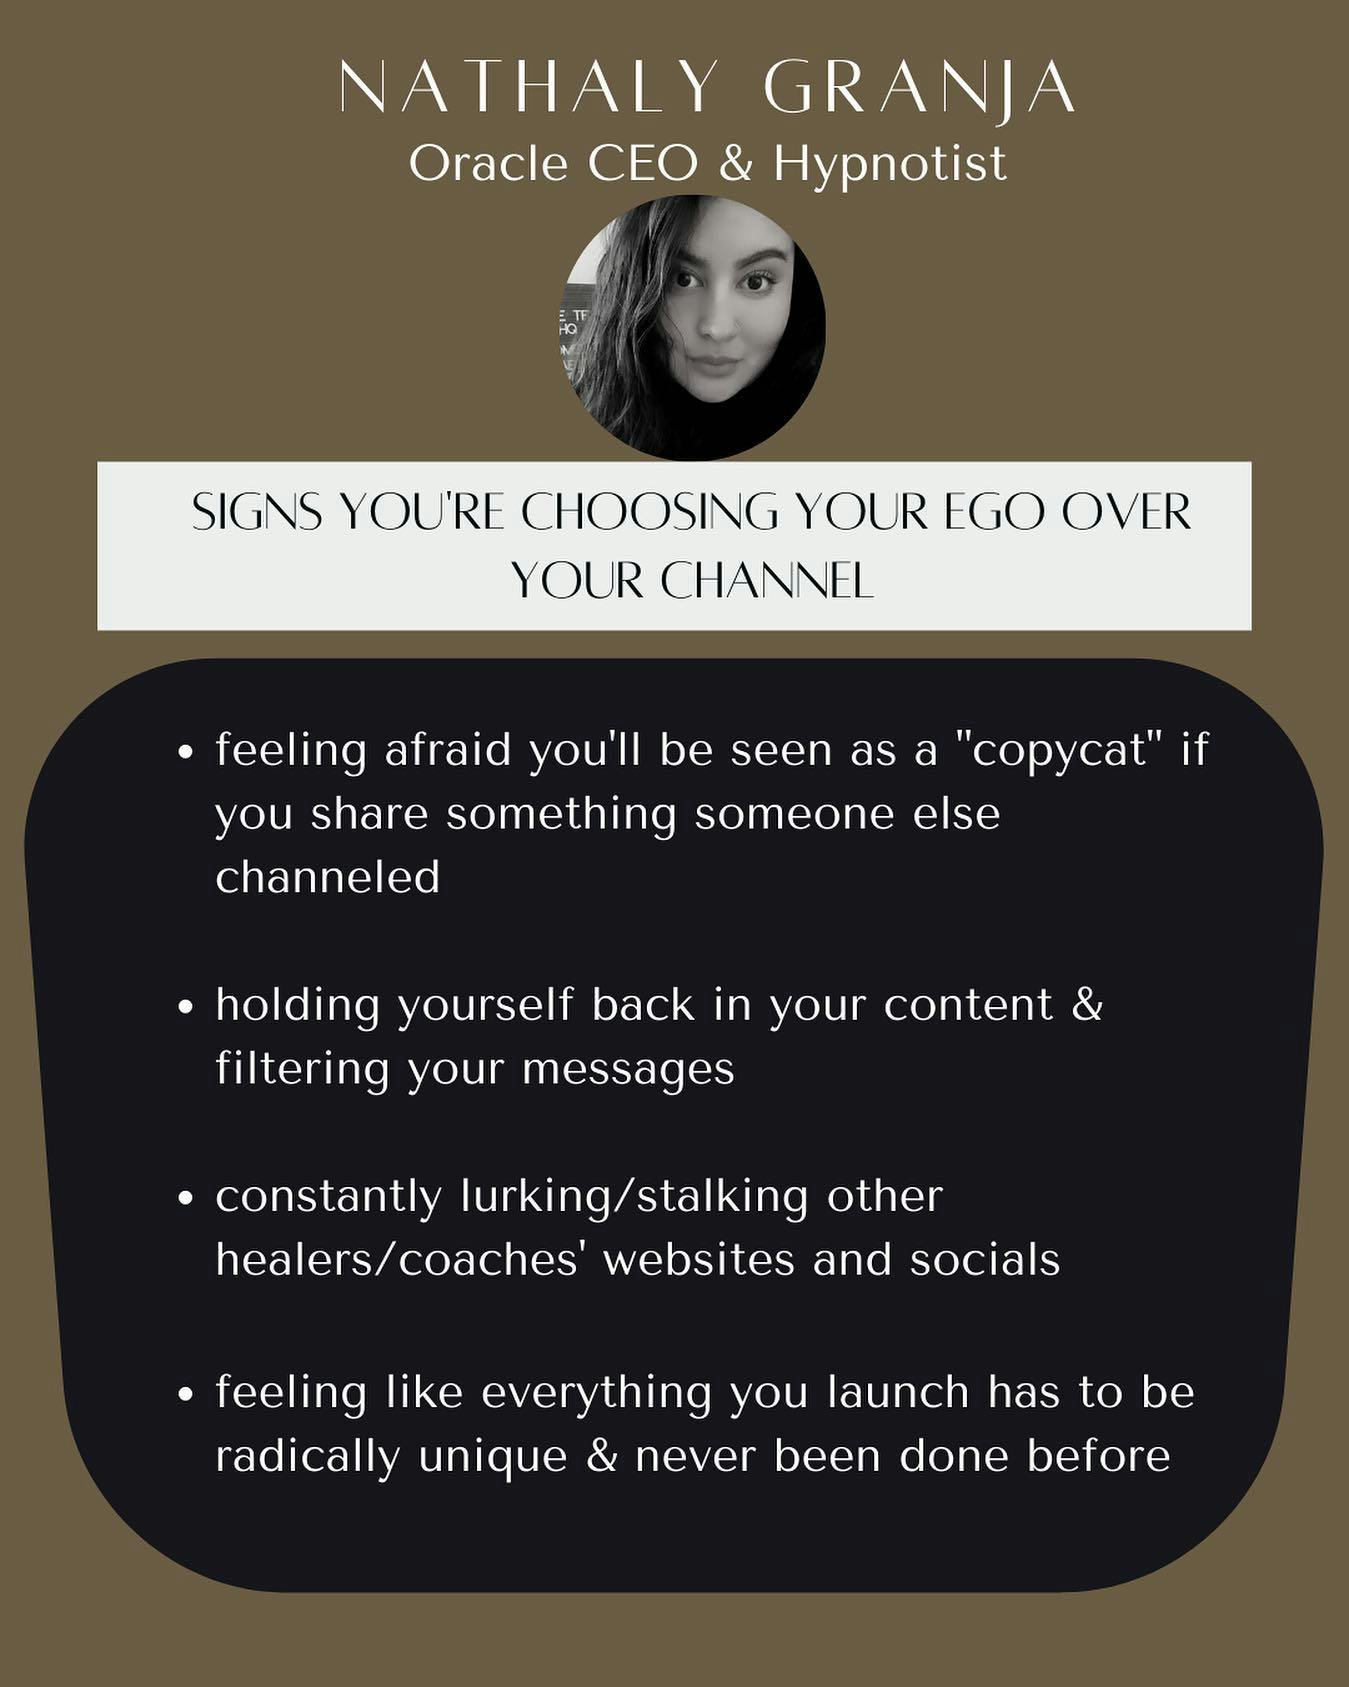 ðŸ’« 4 reminders for when you find yourself choosing EGO over channel ðŸ’«â� â� 
â� â� 
Do you ever find yourself comparing yourself to other intuitives?â� â� 
â� â� 
Maybe this comparison shows up as: â� â� 
â� â� 
-fearing you wonâ€™t seem â€œuniqueâ€� enough if others are sharing the same message as youâ� â� 
-being scared to be seen as a copycat if you have a similar program/course as someone elseâ� â� 
-muting yourself because â€œitâ€™s been said alreadyâ€�â� â� 
â� â� 
My dear Oracles...please remember these 4 things ðŸ‘‡ðŸ�½â� â� 
â� â� 
ð��–ð��ž ð��šð��¥ð��¥ ð��«ð��žð��¬ð��¨ð��§ð��šð��­ð��ž ð��°ð��¢ð��­ð��¡ ð���ð��¢ð��Ÿð��Ÿð��žð��«ð��žð��§ð��­ ð��©ð��žð��«ð��¬ð��©ð��žð��œð��­ð��¢ð��¯ð��žð��¬.â� â� 
â� â� 
Worried about sharing the same thing as others? â� â� 
â� â� 
REMEMBER ðŸ‘‰ðŸ�½ We all resonate with different voices âœ¨âœ¨â� â� 
â� â� 
When we donâ€™t recognize the importance of trusting our channel, we sabotage the ability to be seen by the client who needs to hear it FROM US specifically. â� â� 
â� â� 
ð��˜ð��¨ð��®ð��« ð��žð�� ð��¨ ð��¢ð��¬ ð��œð��¨ð��§ð��¬ð��­ð��šð��§ð��­ð��¥ð��² ð��­ð��«ð��²ð��¢ð��§ð��  ð��­ð��¨ ð��©ð��«ð��¨ð��­ð��žð��œð��­ ð��²ð��¨ð��®.â� â� 
â� â� 
Your ego is simply fighting for your survival. Itâ€™s your lizard brain, itâ€™s competition.â� â� 
â� â� 
Somewhere along your lineage you probably learned that it wasnâ€™t safe to share your voice, much less intuitive voices. We must retrain our mind (and hearts) to remember it is safe to be seen and heard.â� â� 
â� â� 
â� â� 
ð��Žð��®ð��« ð��­ð��«ð��¢ð�� ð�� ð��žð��«ð��¬ ð��œð��šð��§ ð��›ð��ž ð��¨ð��®ð��« ð�� ð��«ð��žð��šð��­ð��žð��¬ð��­ ð��­ð��žð��šð��œð��¡ð��žð��«ð��¬.â� â� 
When youâ€™re feeling triggered by other people, itâ€™s an OPPORTUNITY to anchor more heavily into your purpose and mission. â� â� 
â� â� 
When you fully trust in your channel, youâ€™re no longer concerned with what those around you are doing. â� â� 
â� â� 
ð��’ð��¢ð��¦ð��¢ð��¥ð��šð��« ð��œð��¡ð��šð��§ð��§ð��žð��¥ð��¢ð��§ð�� ð��¬ ð��¦ð��žð��šð��§ ð��°ð��žâ€™ð��«ð��ž ð��­ð��šð��©ð��©ð��žð��� ð��¢ð��§ð��­ð��¨ ð��­ð��¡ð��ž same important ð��œð��¨ð��¥ð��¥ð��žð��œð��­ð��¢ð��¯ð��ž message.â� â� 
â� â� 
I fully EMBRACE when other intuitives are channeling similar messages. â� â� 
â� â� 
To me, itâ€™s a sign of validation that collectively, these are messages all of us need to hear âœ¨ It confirms just how potent and powerful the channelings are. â� â� 
â� â� 
Did you find these reminders helpful? Which one are you resonating with most?â� â� 